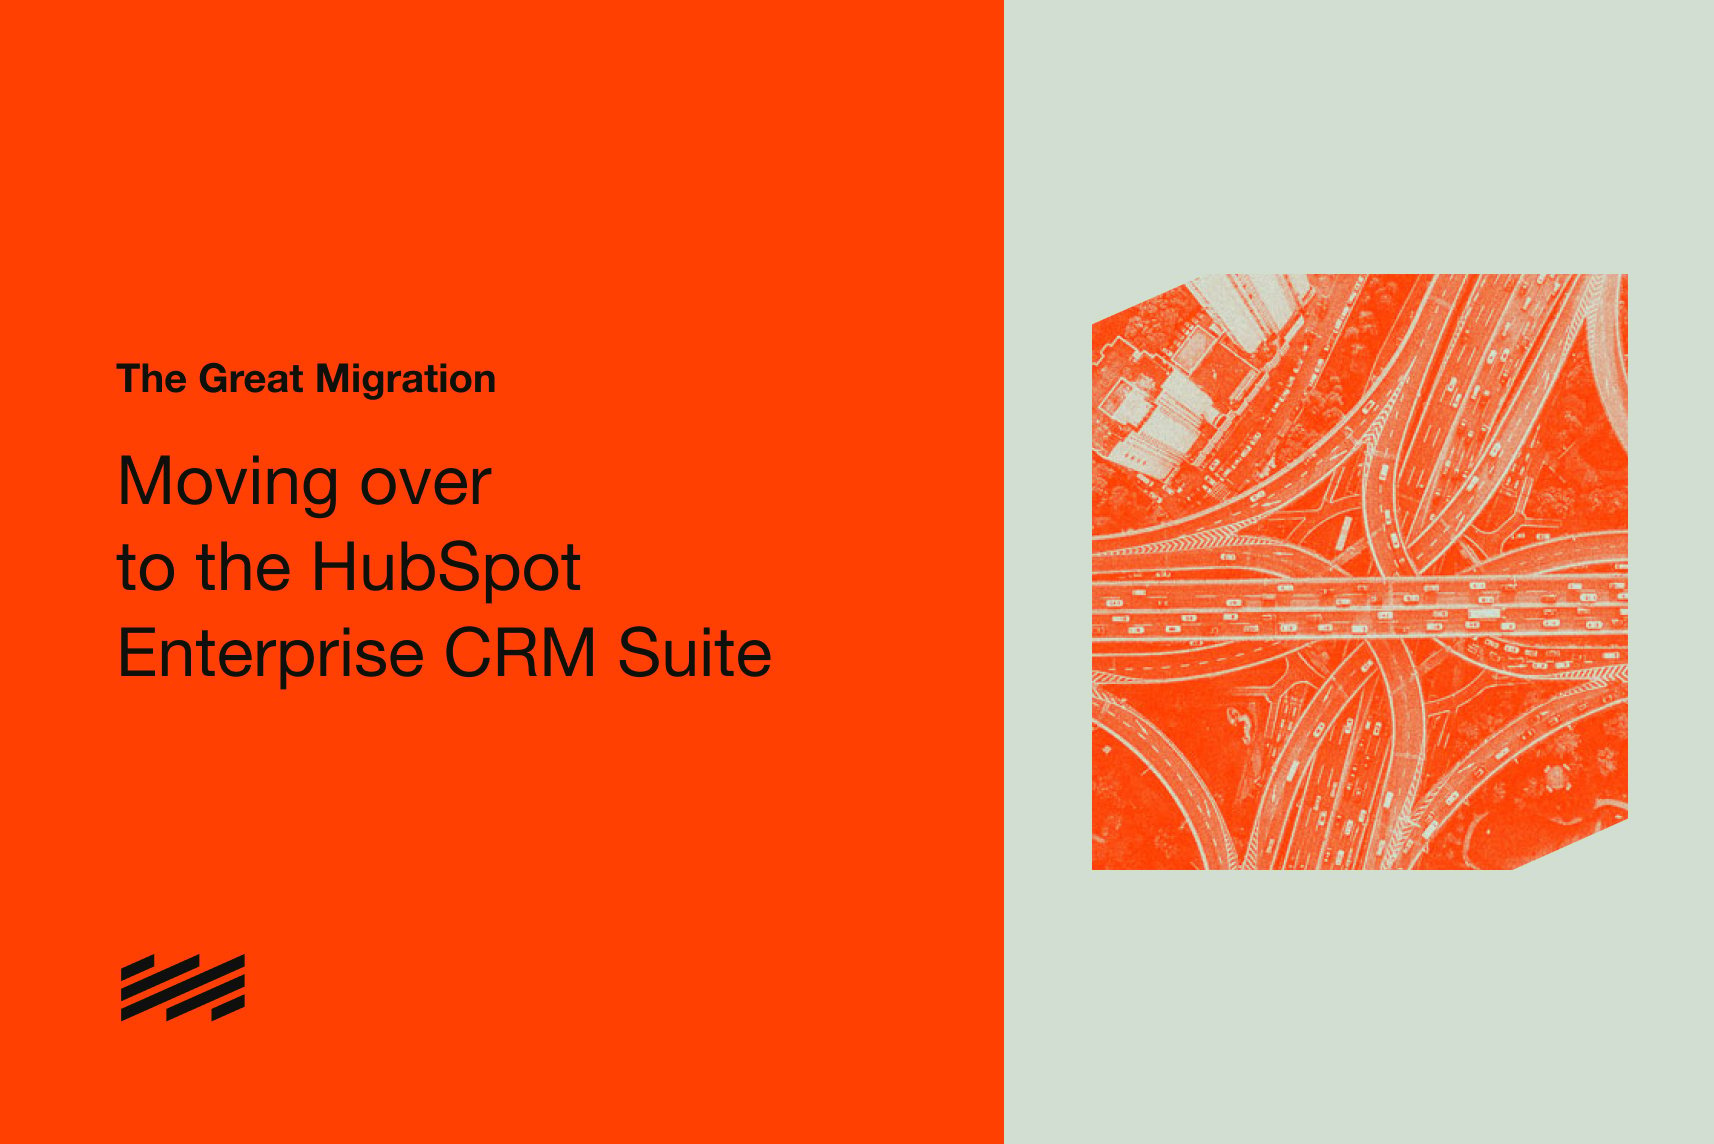 The Great Migration: Moving over to the HubSpot Enterprise CRM Suite